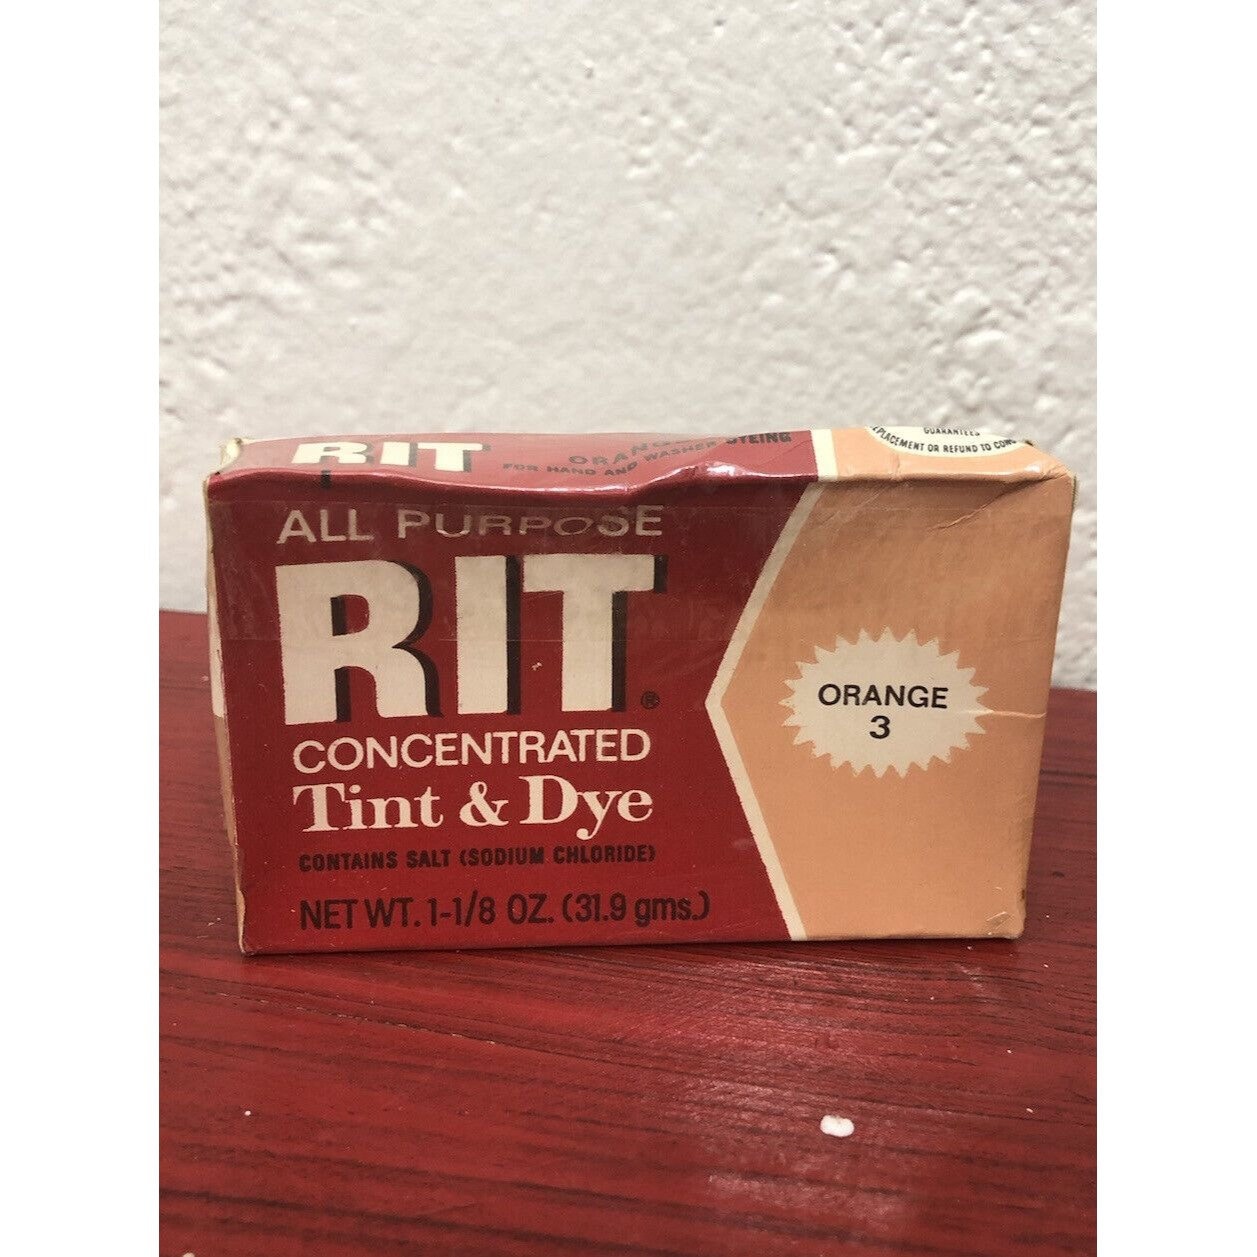 All-purpose Concentrated Fabric Rit Dye Powder Available in